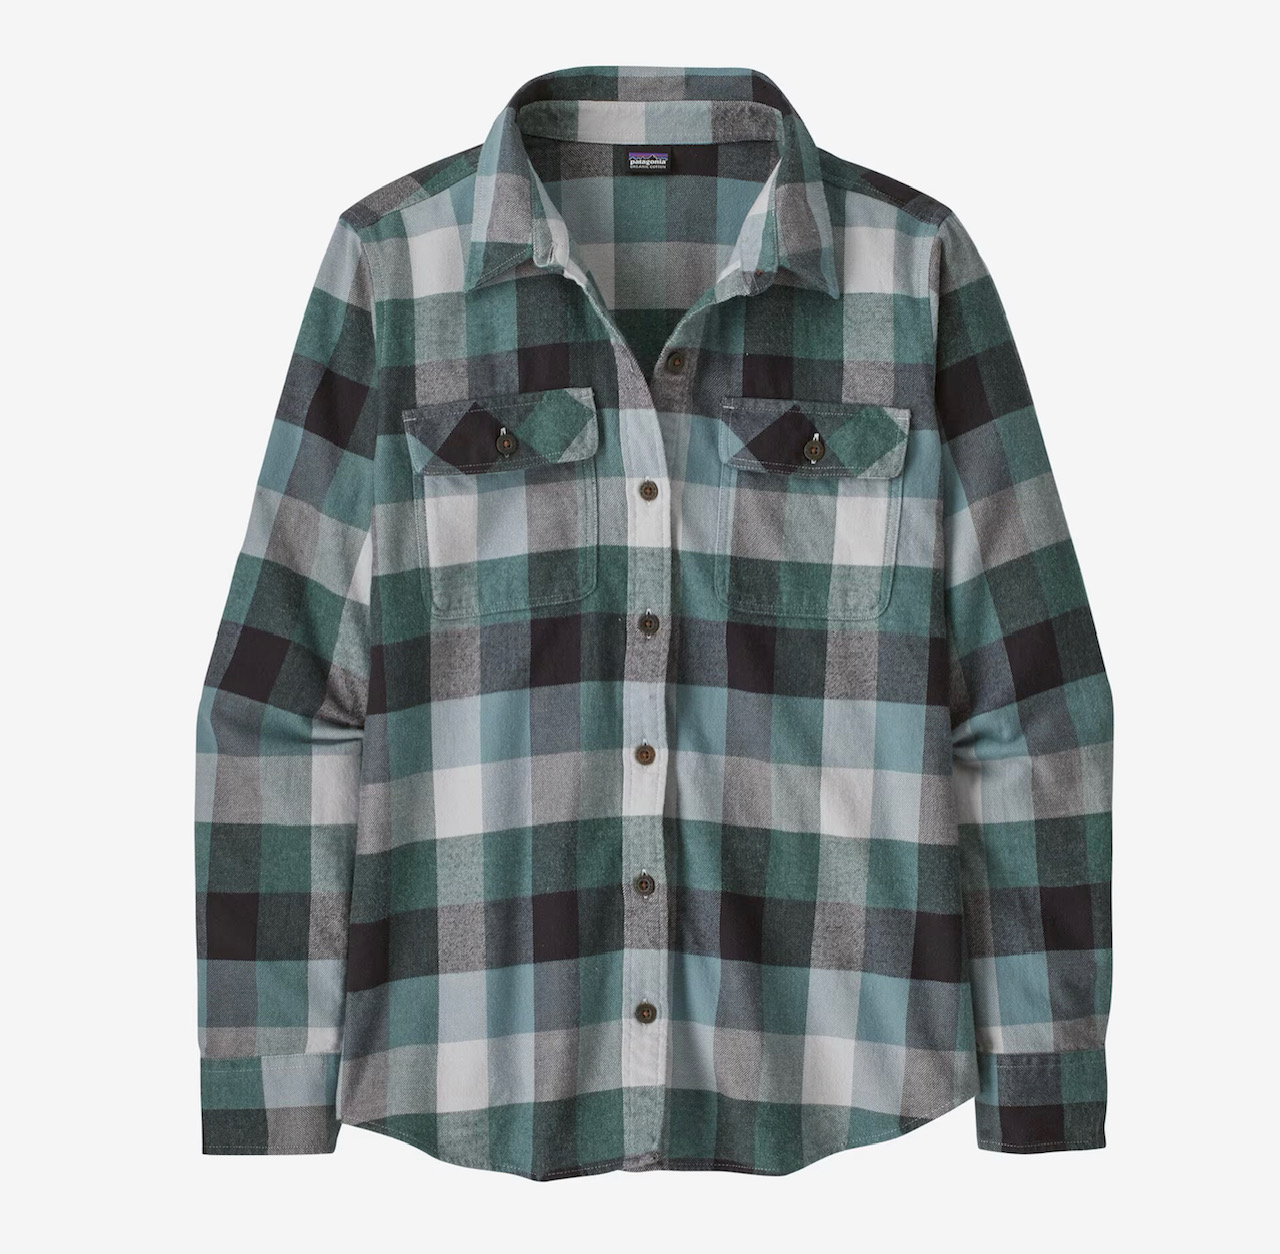 Patagonia W's L/S Organic Cotton MW Fjord Flannel Shirt - Guides: Nouveau Green - Large